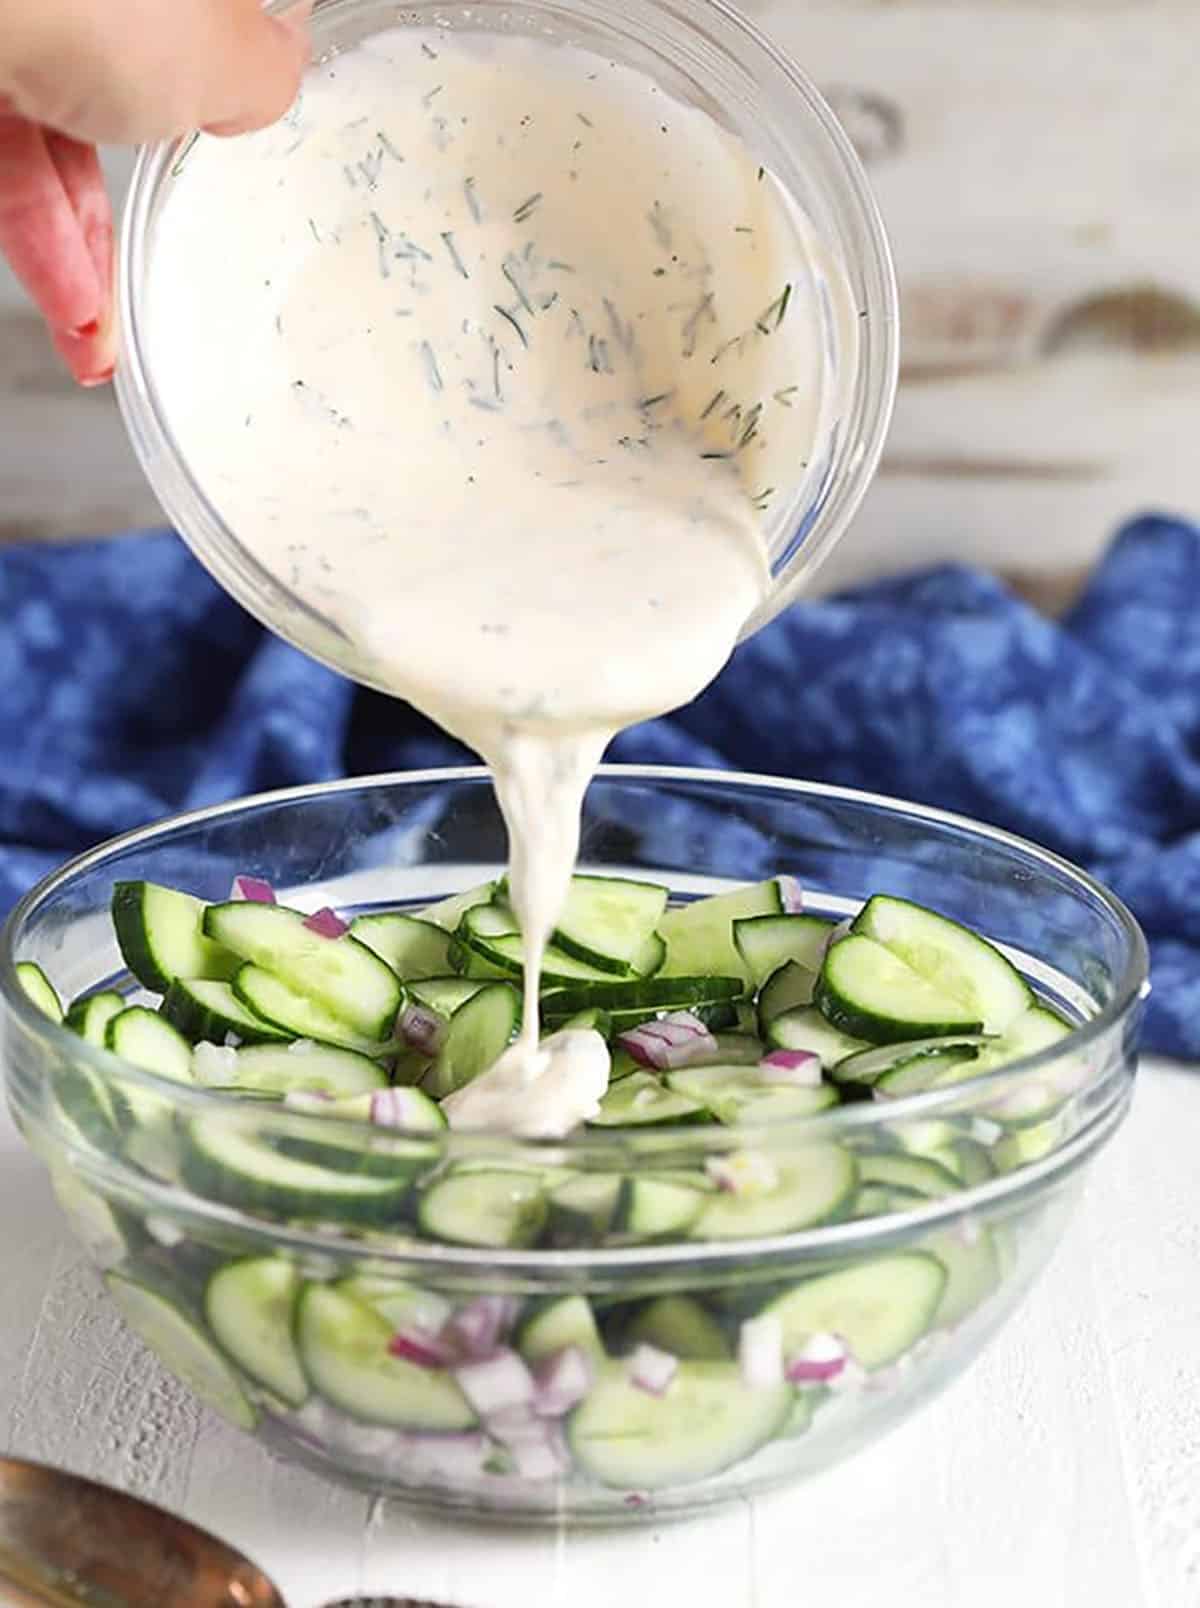 Creamy Cucumber Salad Dressing being poured over cucumbers in a glass bowl.